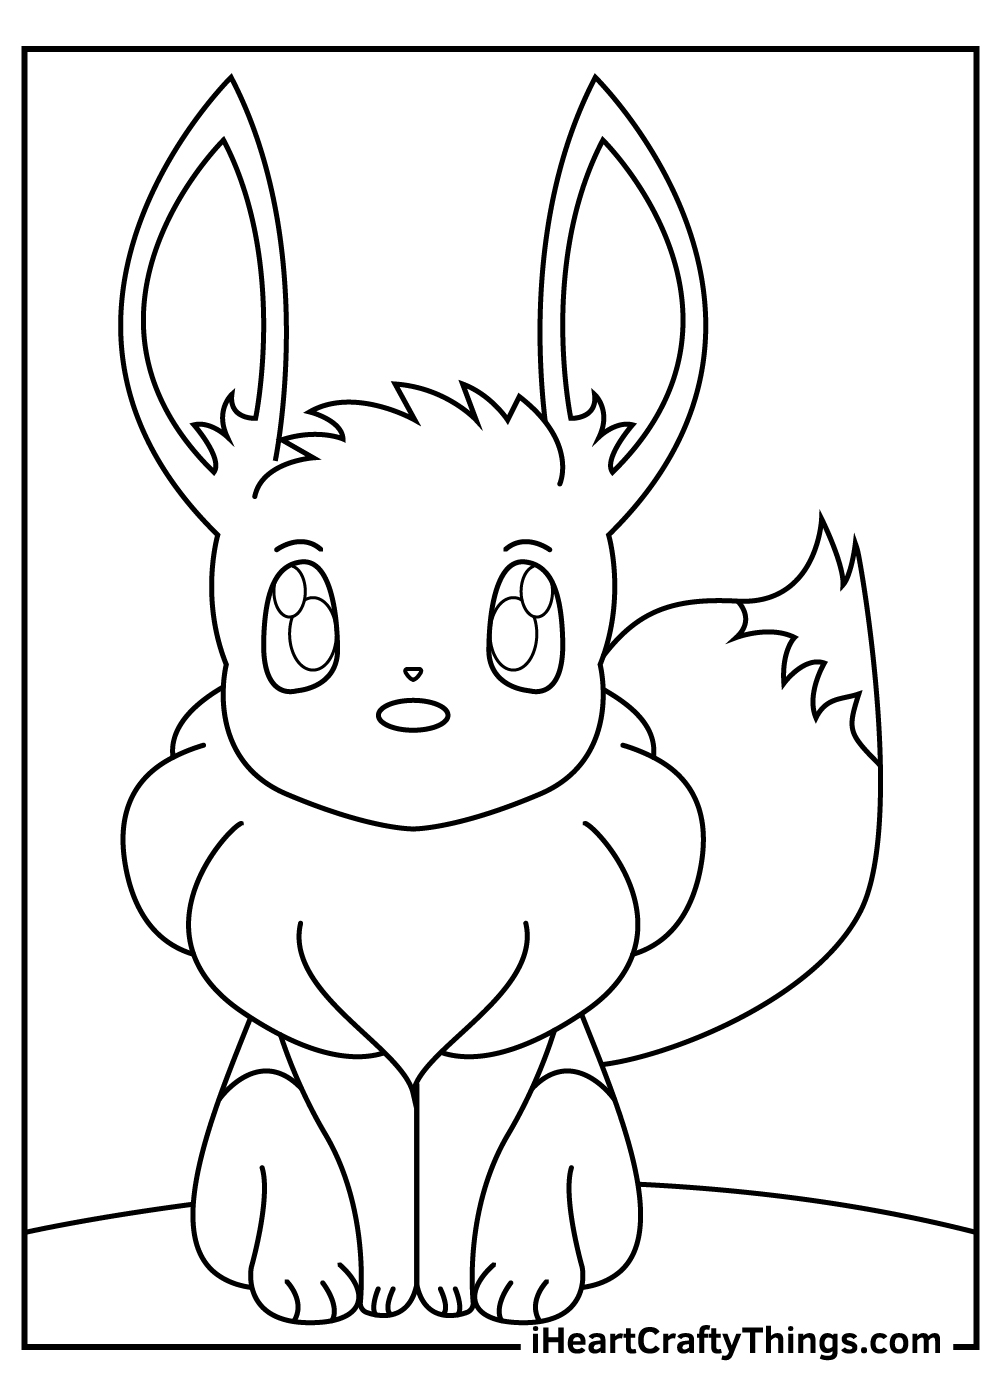 Printable Eevee Pokemon Coloring Pages Updated 20